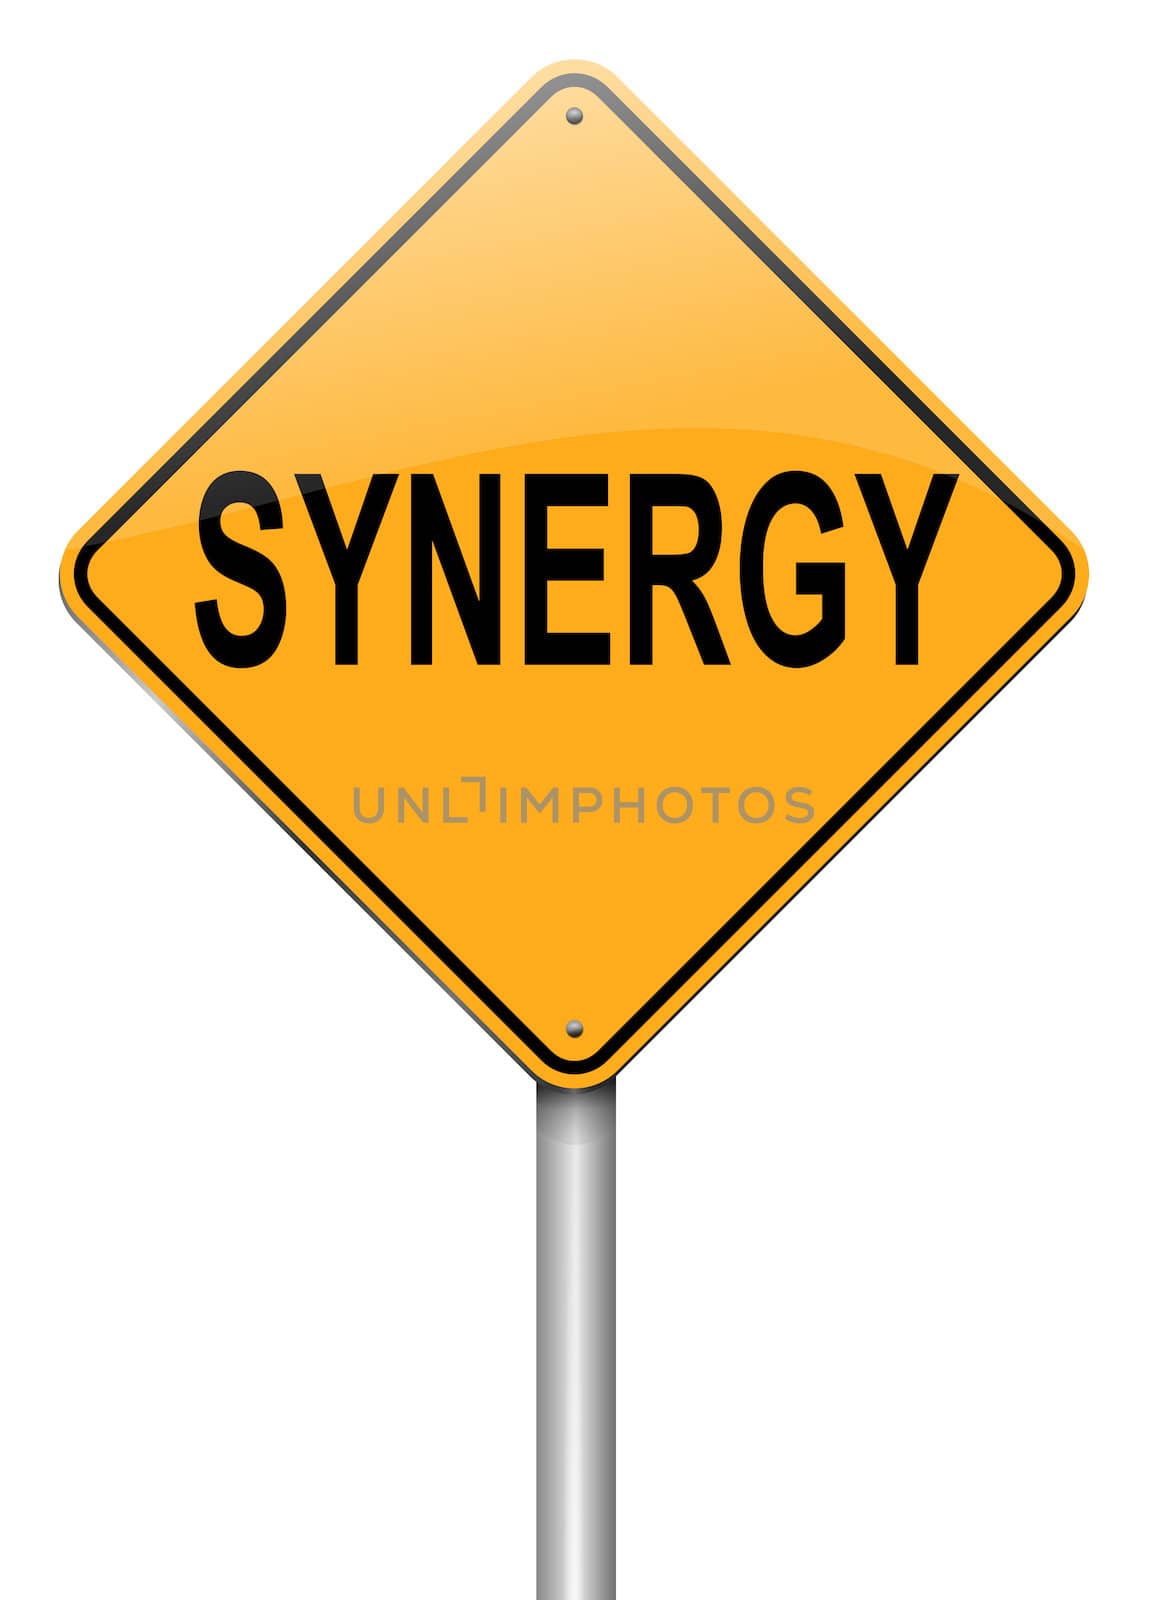 Illustration depicting a roadsign with synergy concept. White background.